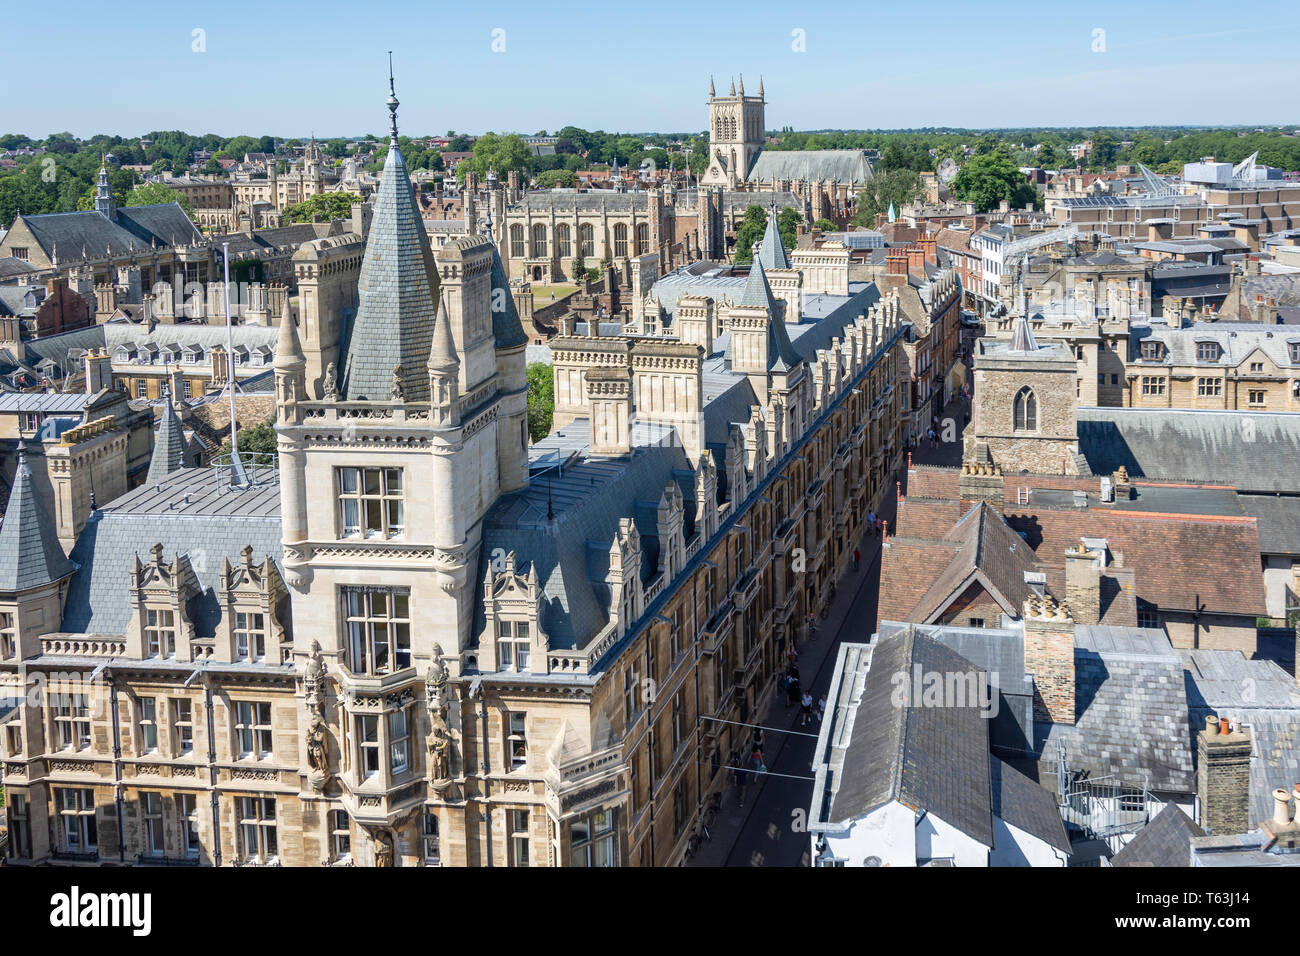 City view from 15th century Great St Mary's Church tower, Cambridge, Cambridgeshire, England, United Kingdom Stock Photo